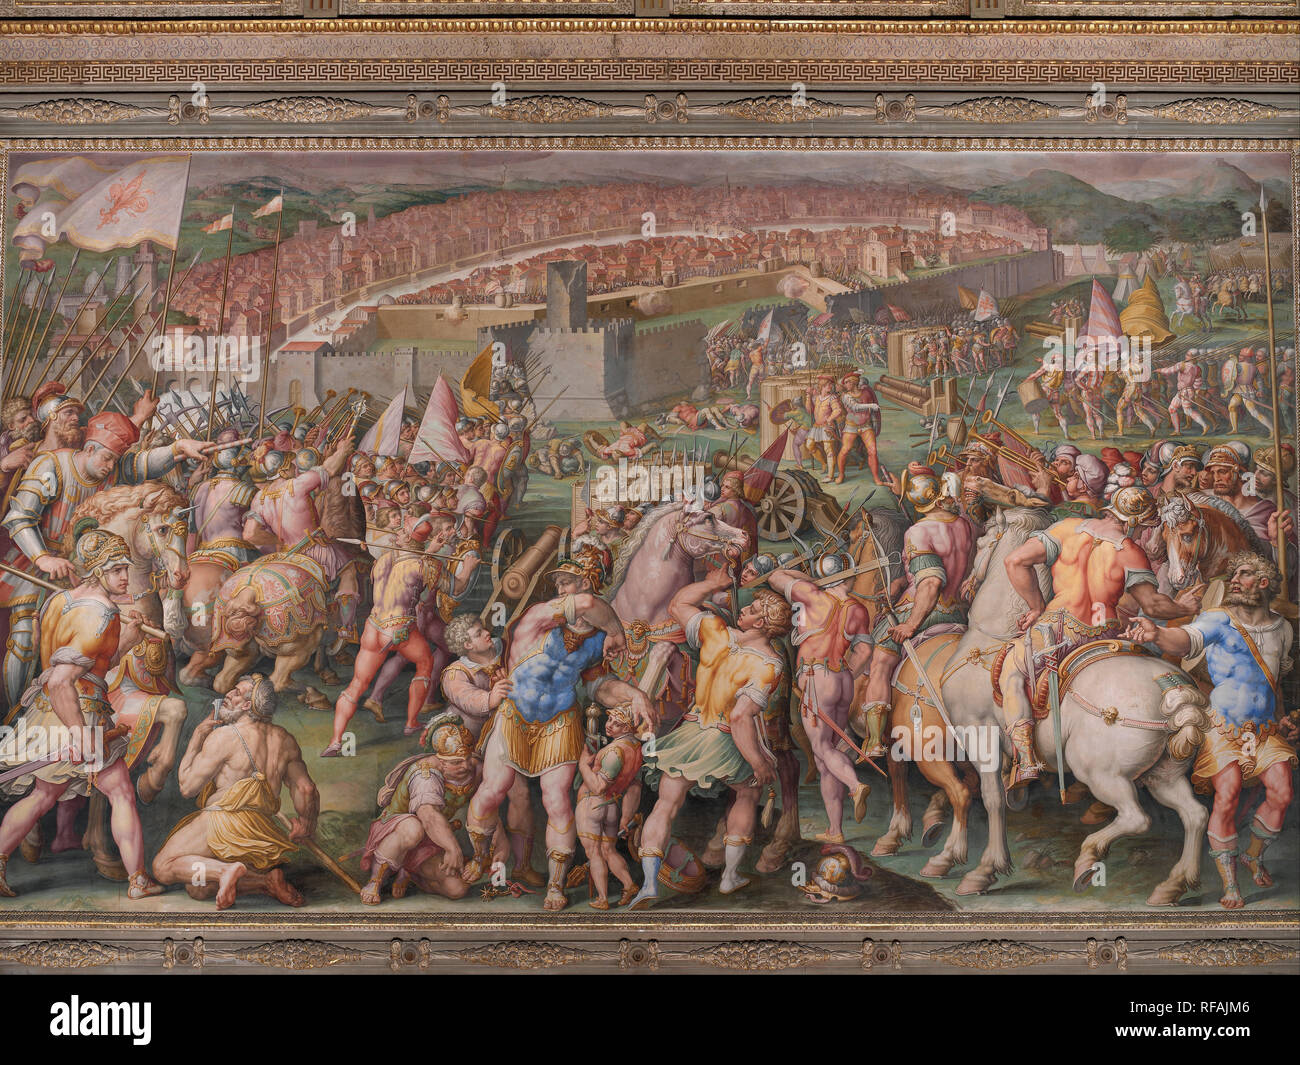 The storming of the fortress of Stampace in Pisa. Date/Period: 1568 - 1571. Painting. Fresco. Height: 760 mm (29.92 in); Width: 1,300 mm (51.18 in). Author: Giorgio Vasari. VASARI, GIORGIO. Stock Photo